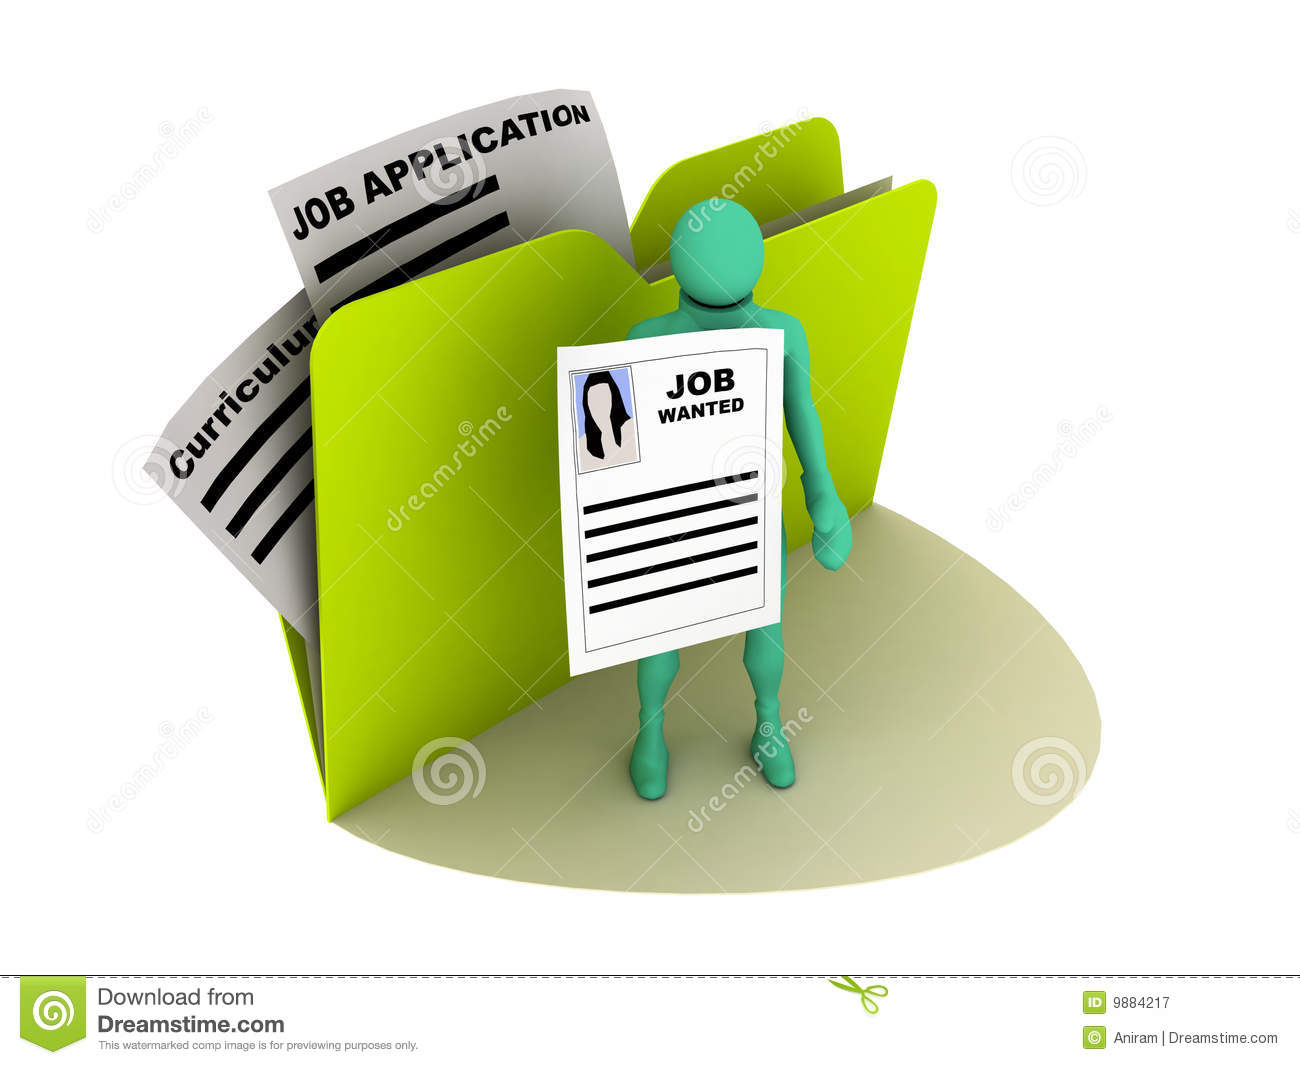 Job Application Clipart Job Wanted Icon With A